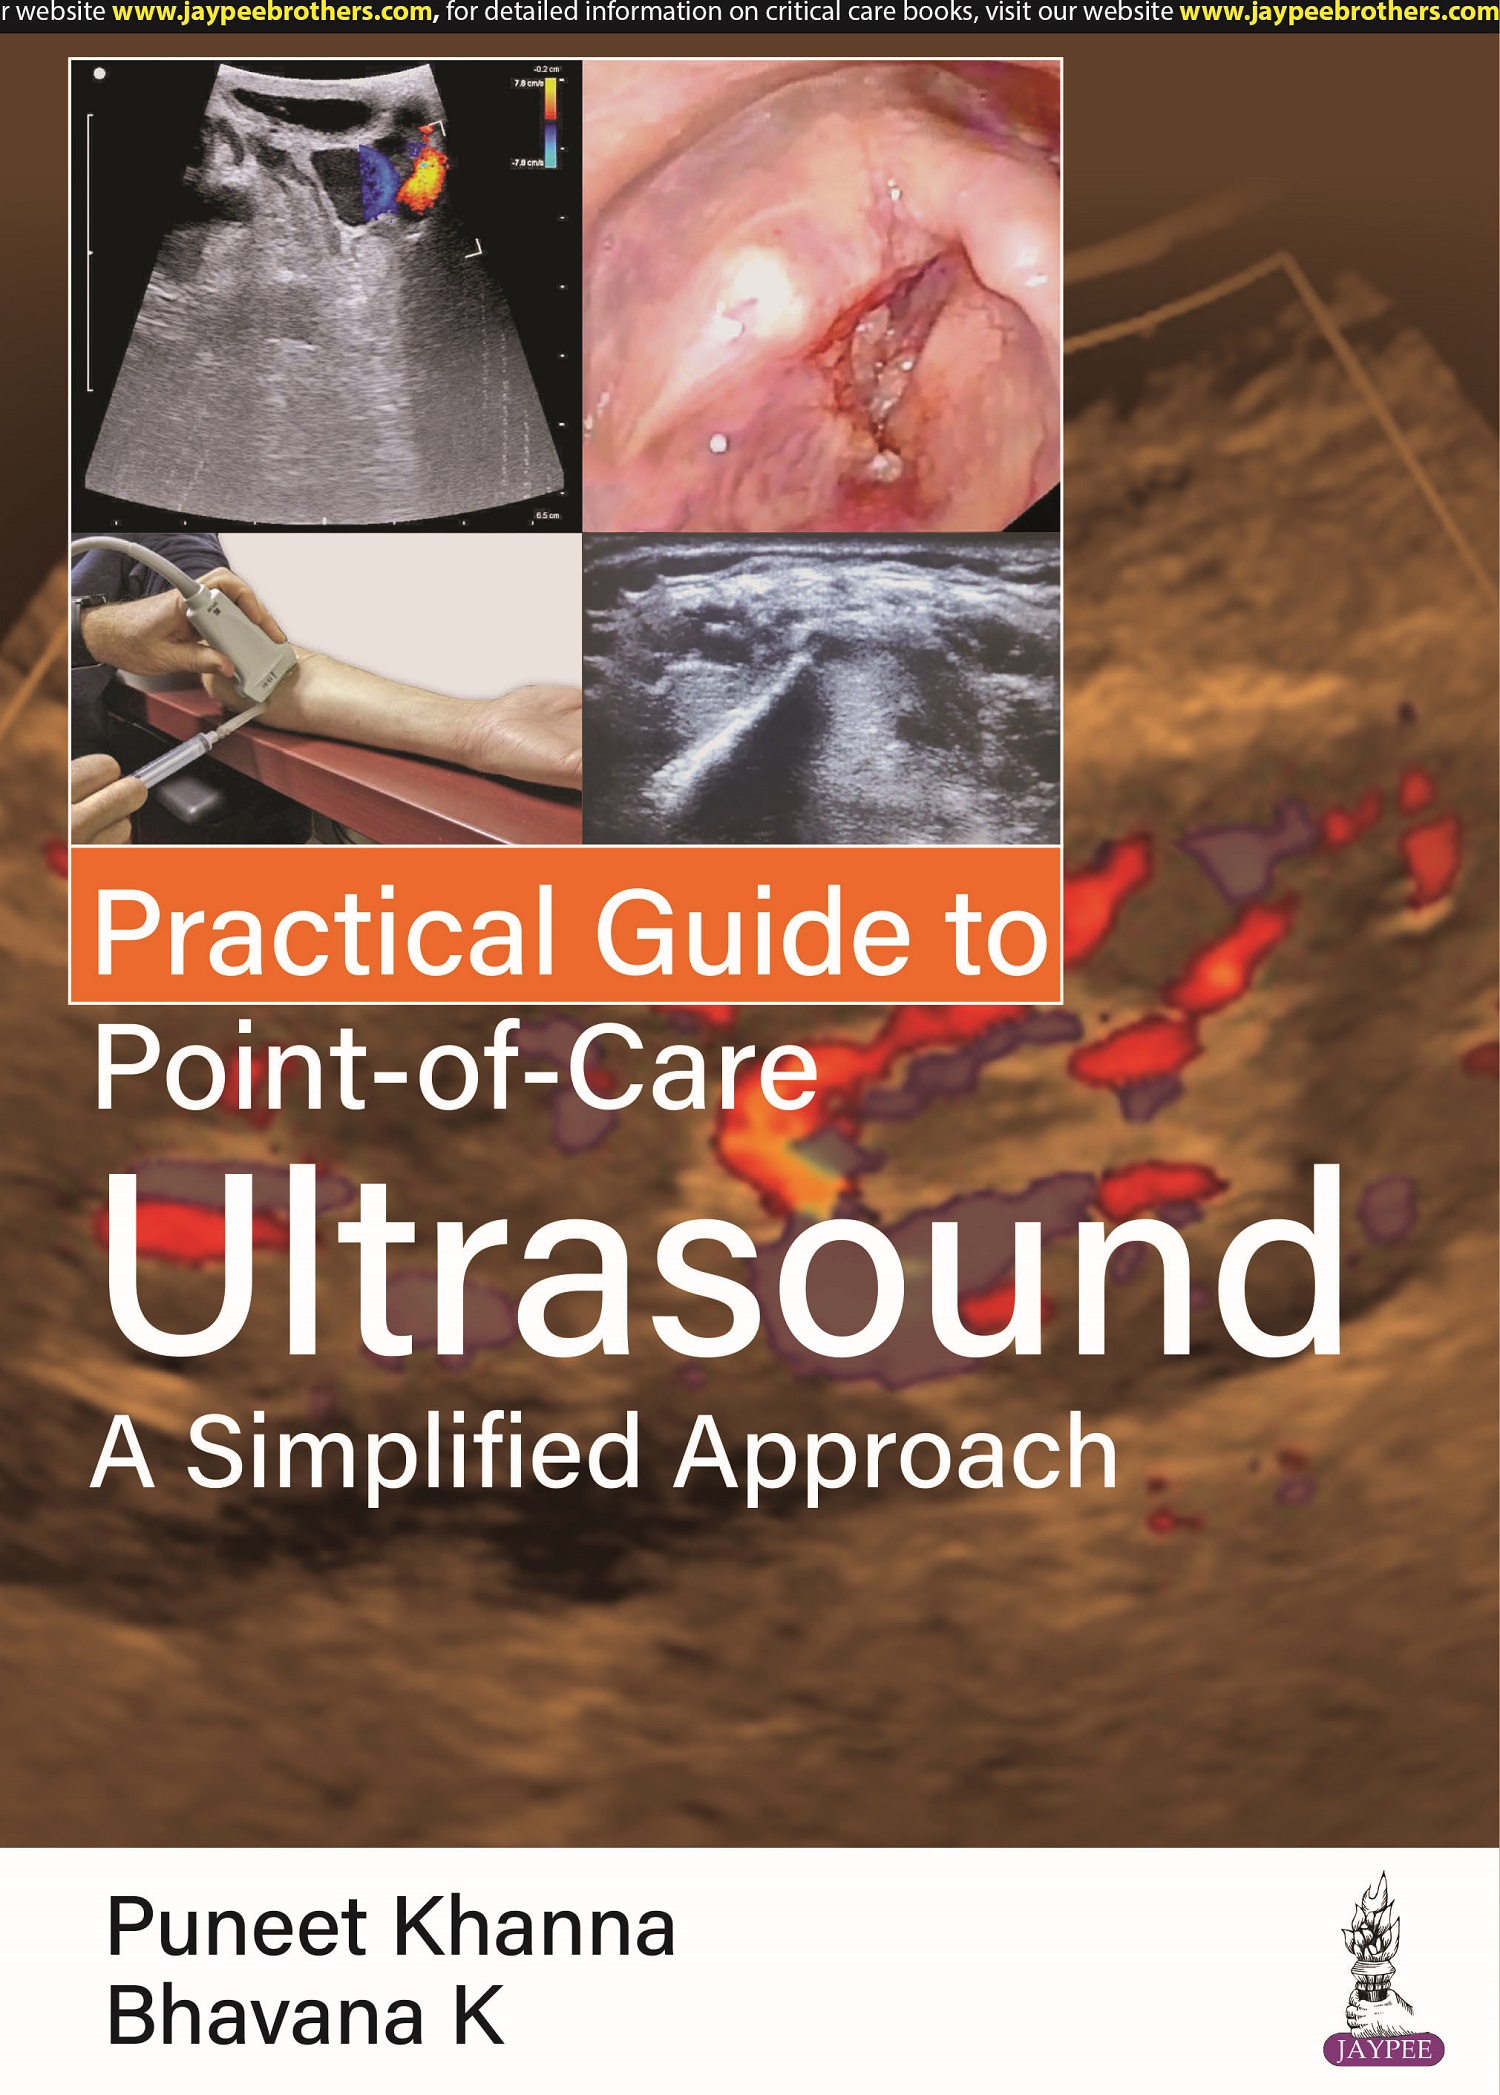 Practical Guide to Point-of-Care Ultrasound: A Simplified Approach